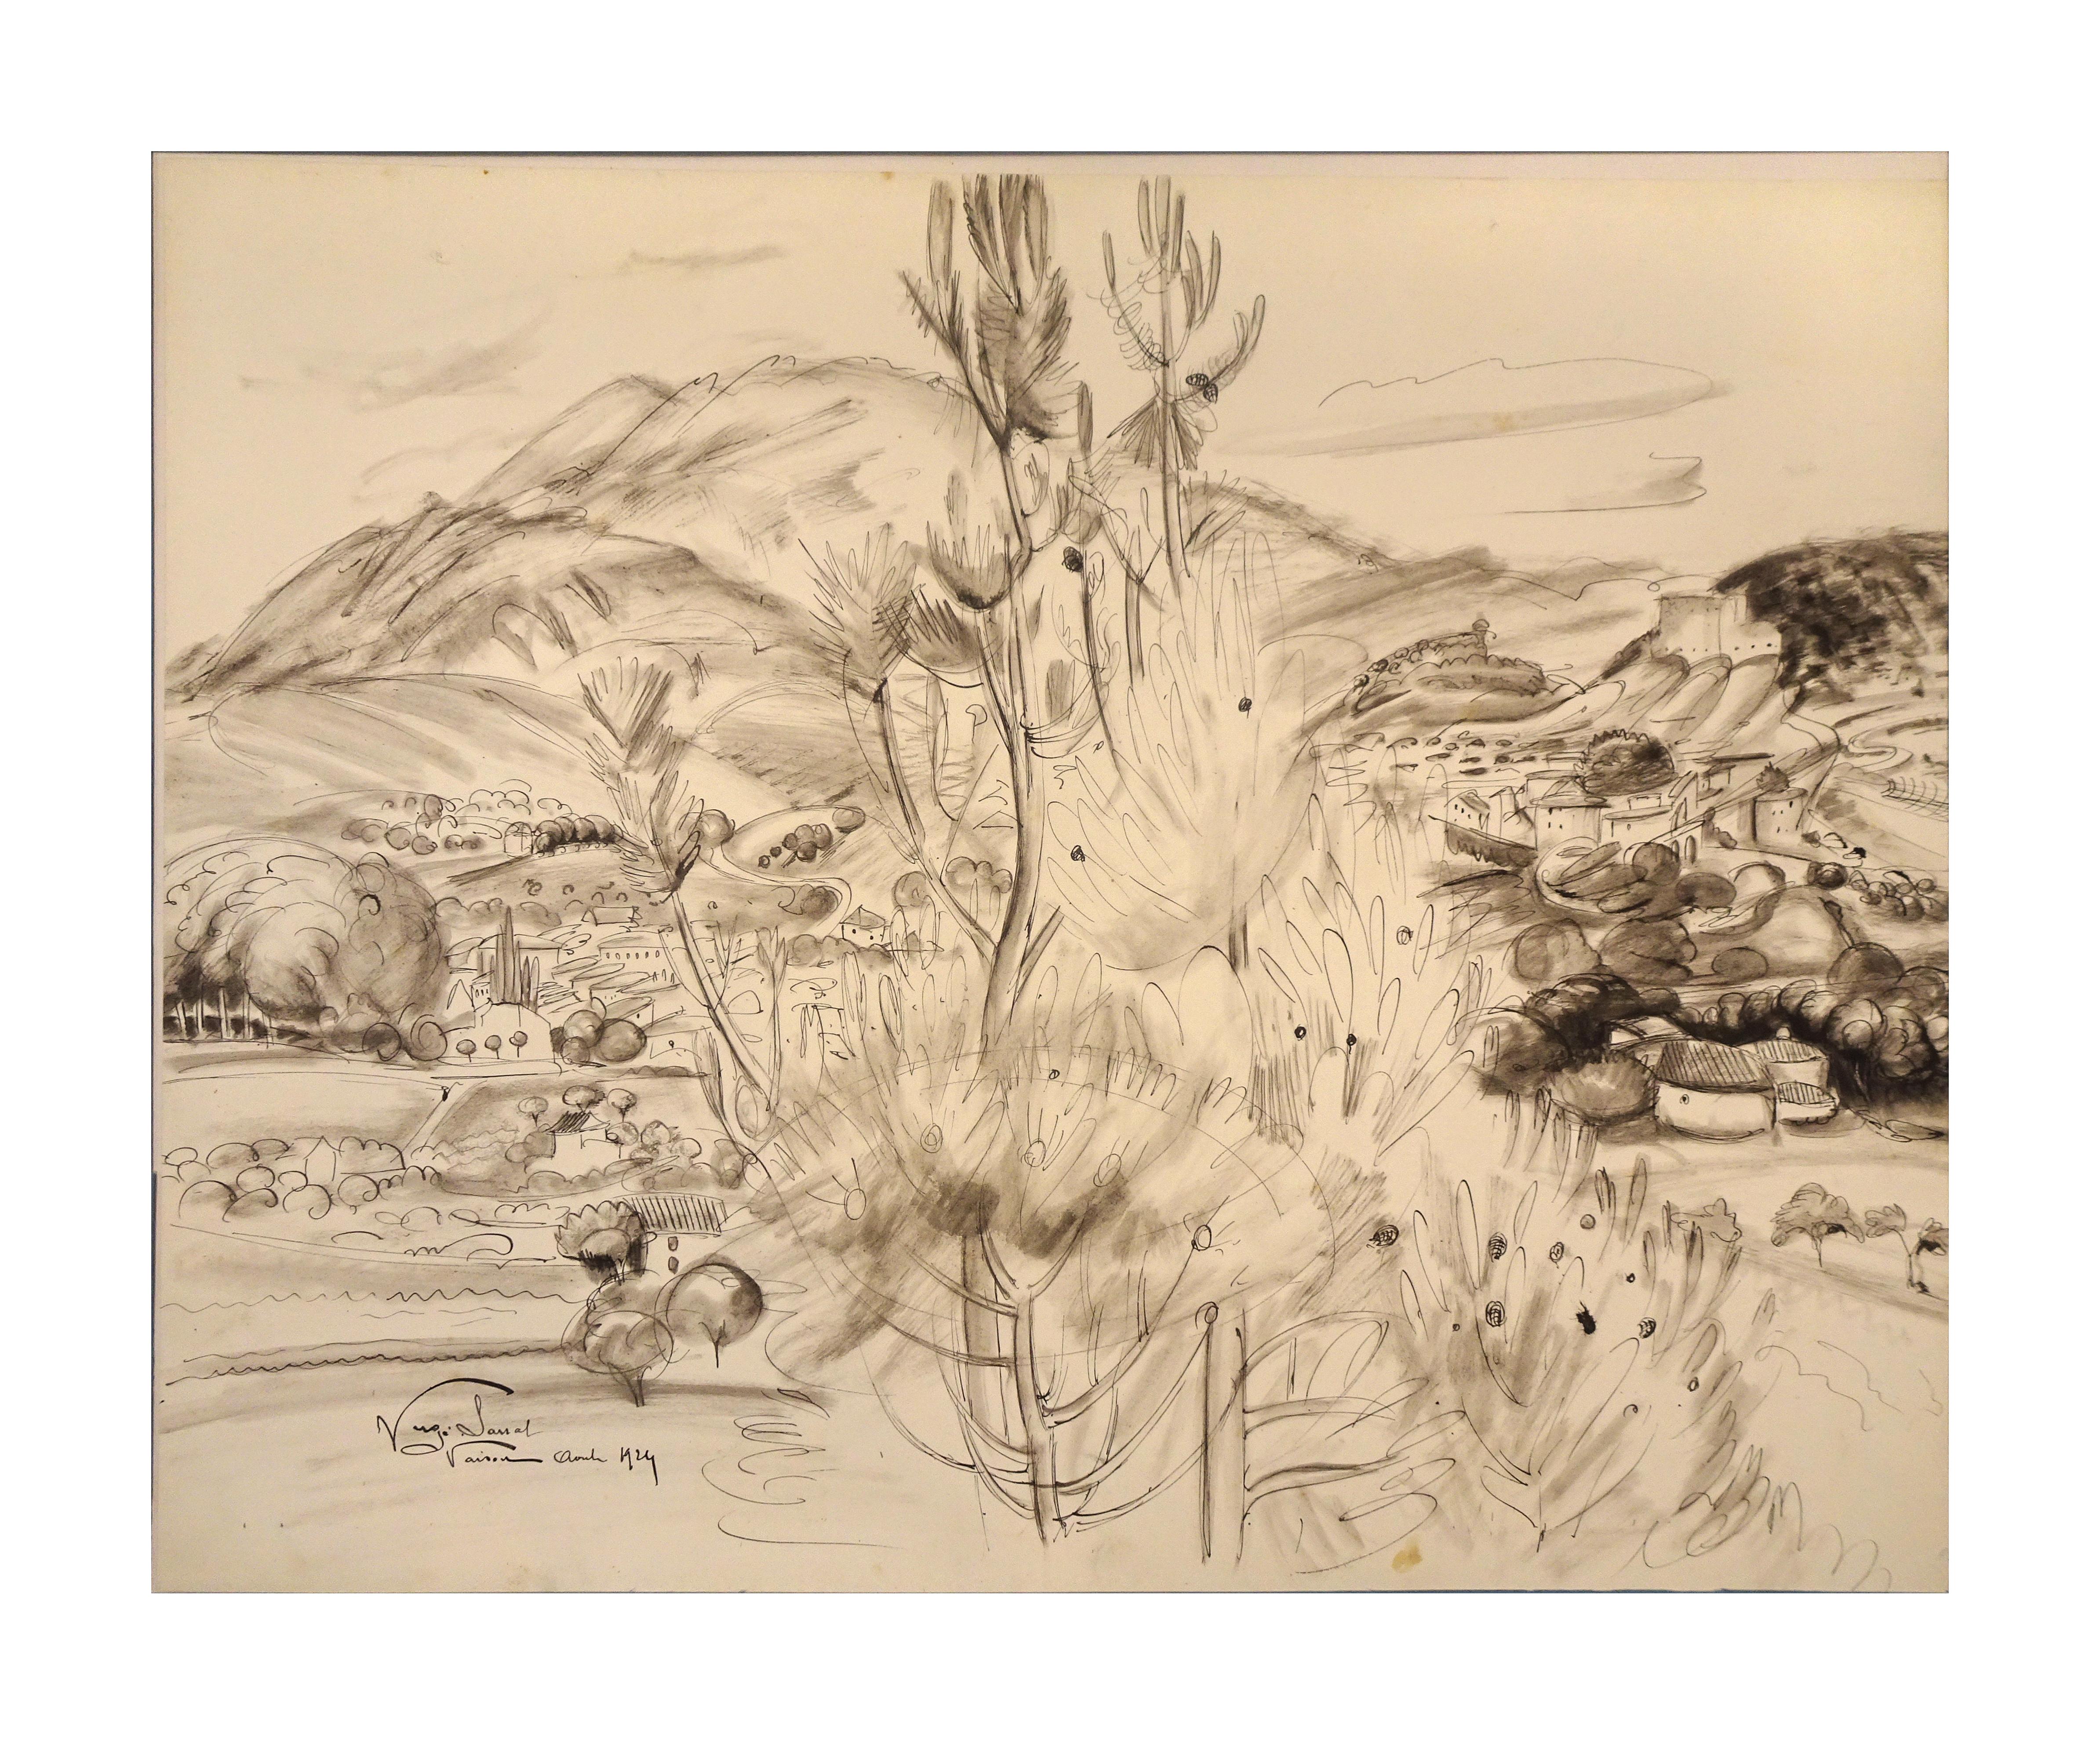 Vaison la Romaine is an original artwork realized by Henry Verger-Sarrat in 1924.

Pencil and china-ink on paper.

Hand-signed, dated, and located on the lower left.

Very good conditions except for some stains on the corners. The sheet is glued on